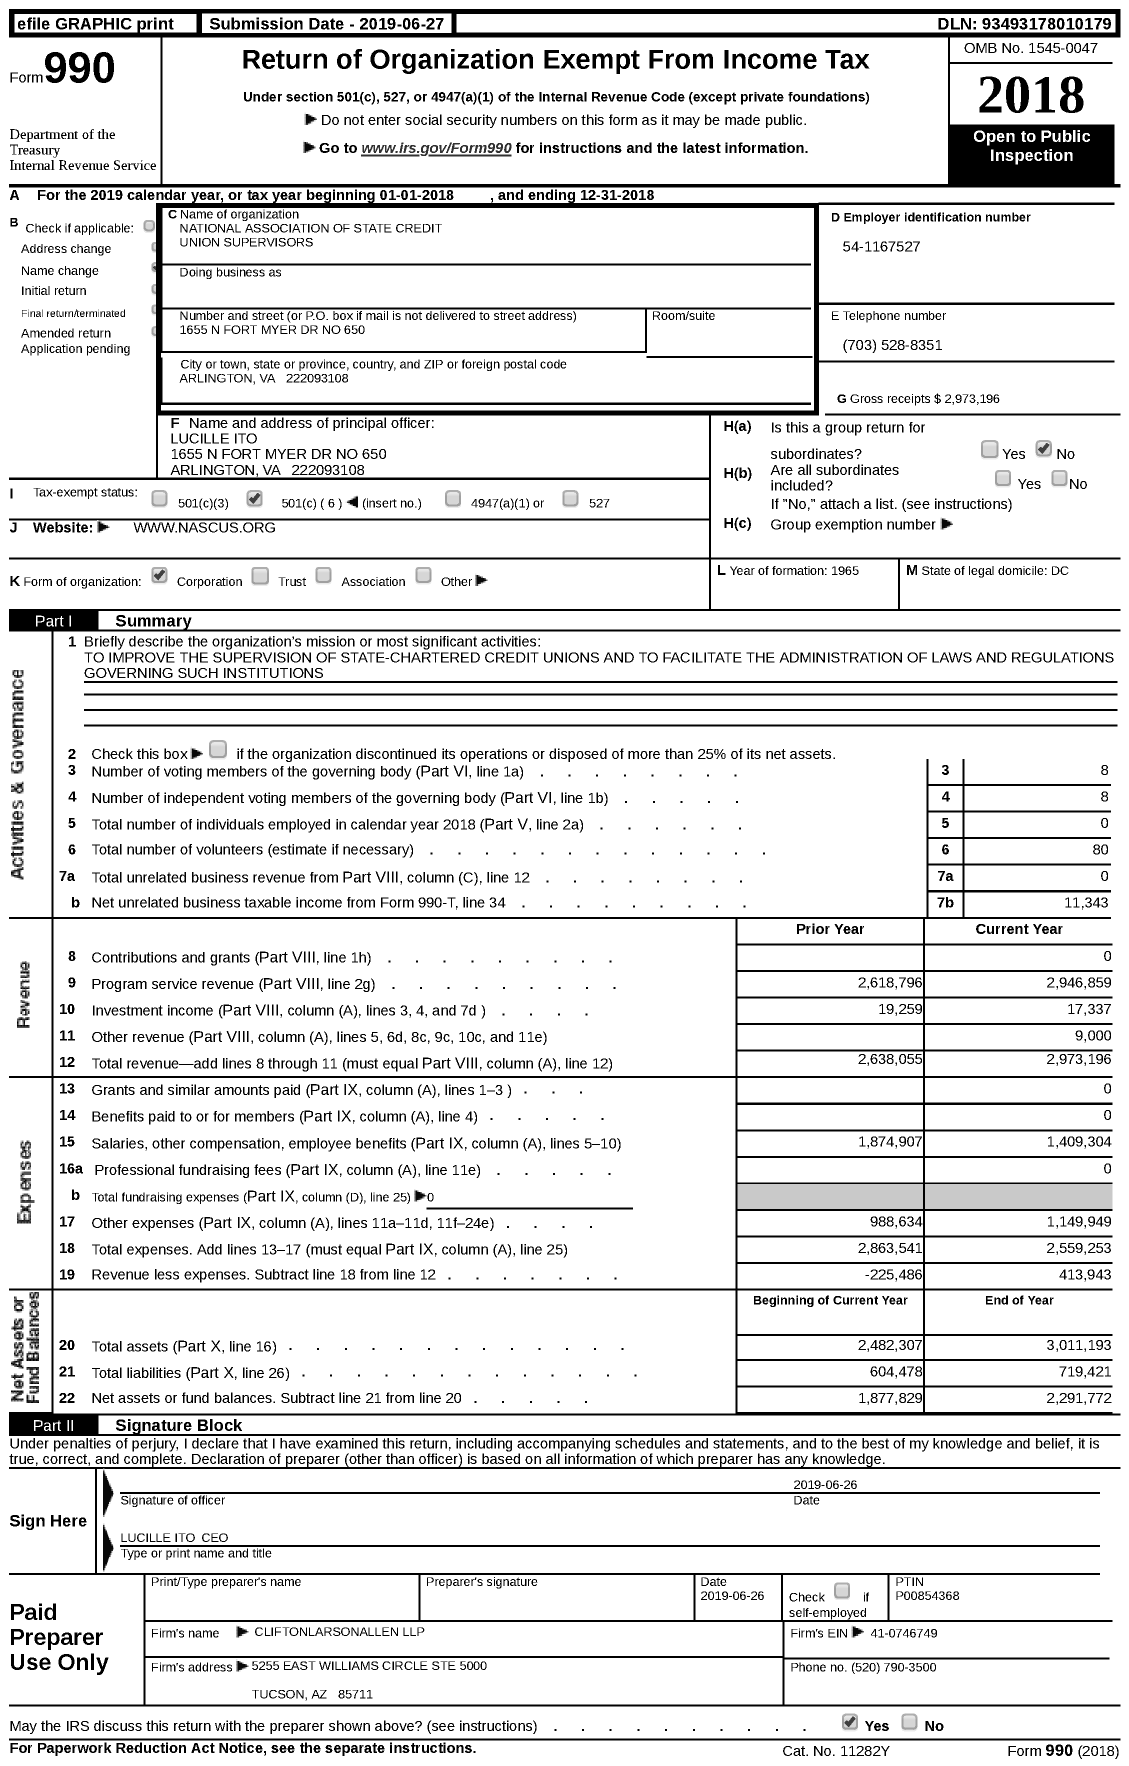 Image of first page of 2018 Form 990 for National Association of State Credit Union Supervisors (NASCUS)